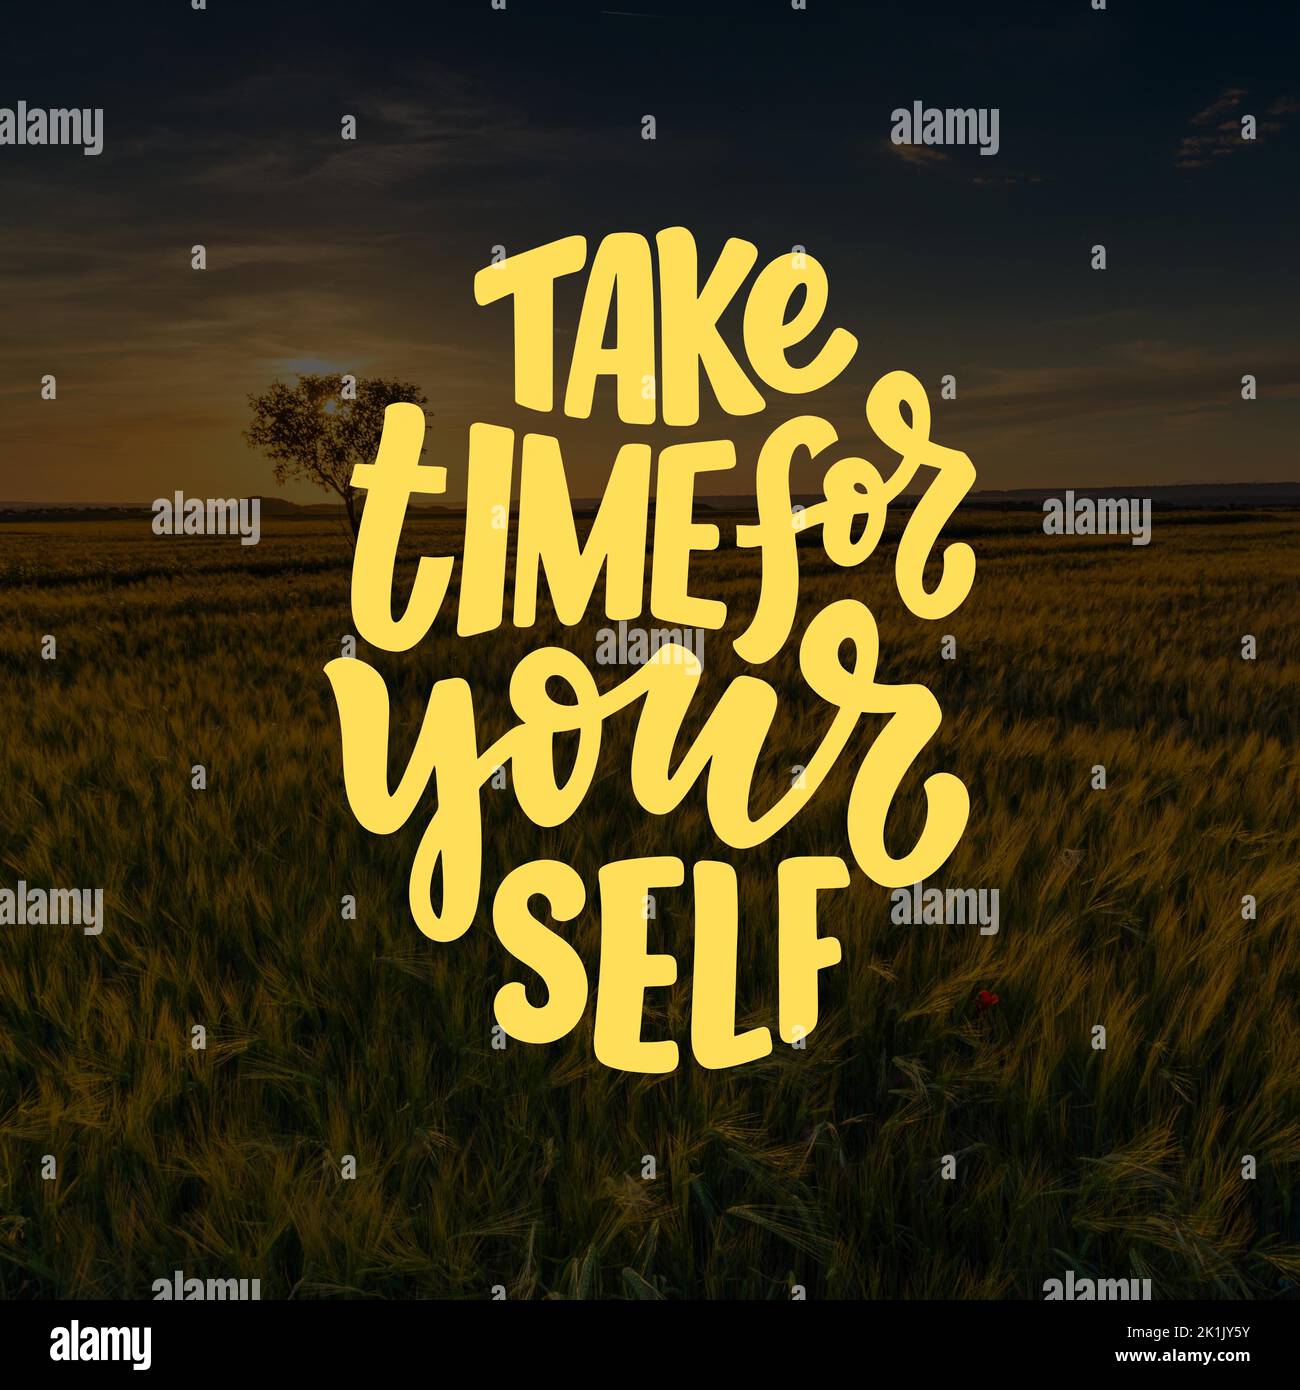 Take time for your self. Motivational quote on natute background Stock Photo